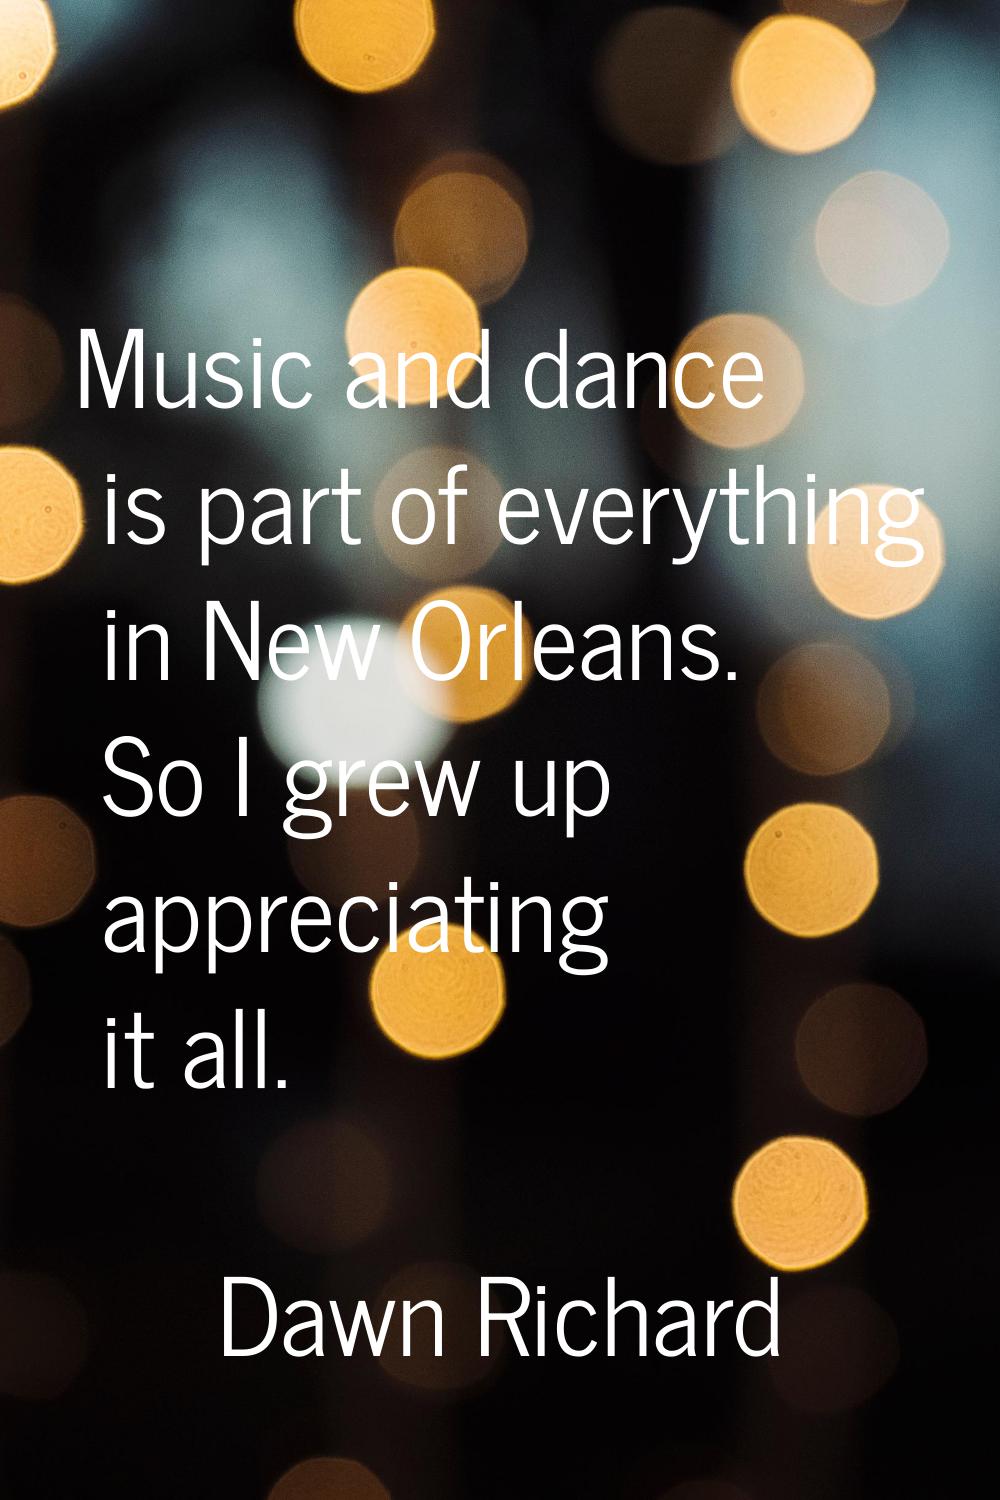 Music and dance is part of everything in New Orleans. So I grew up appreciating it all.